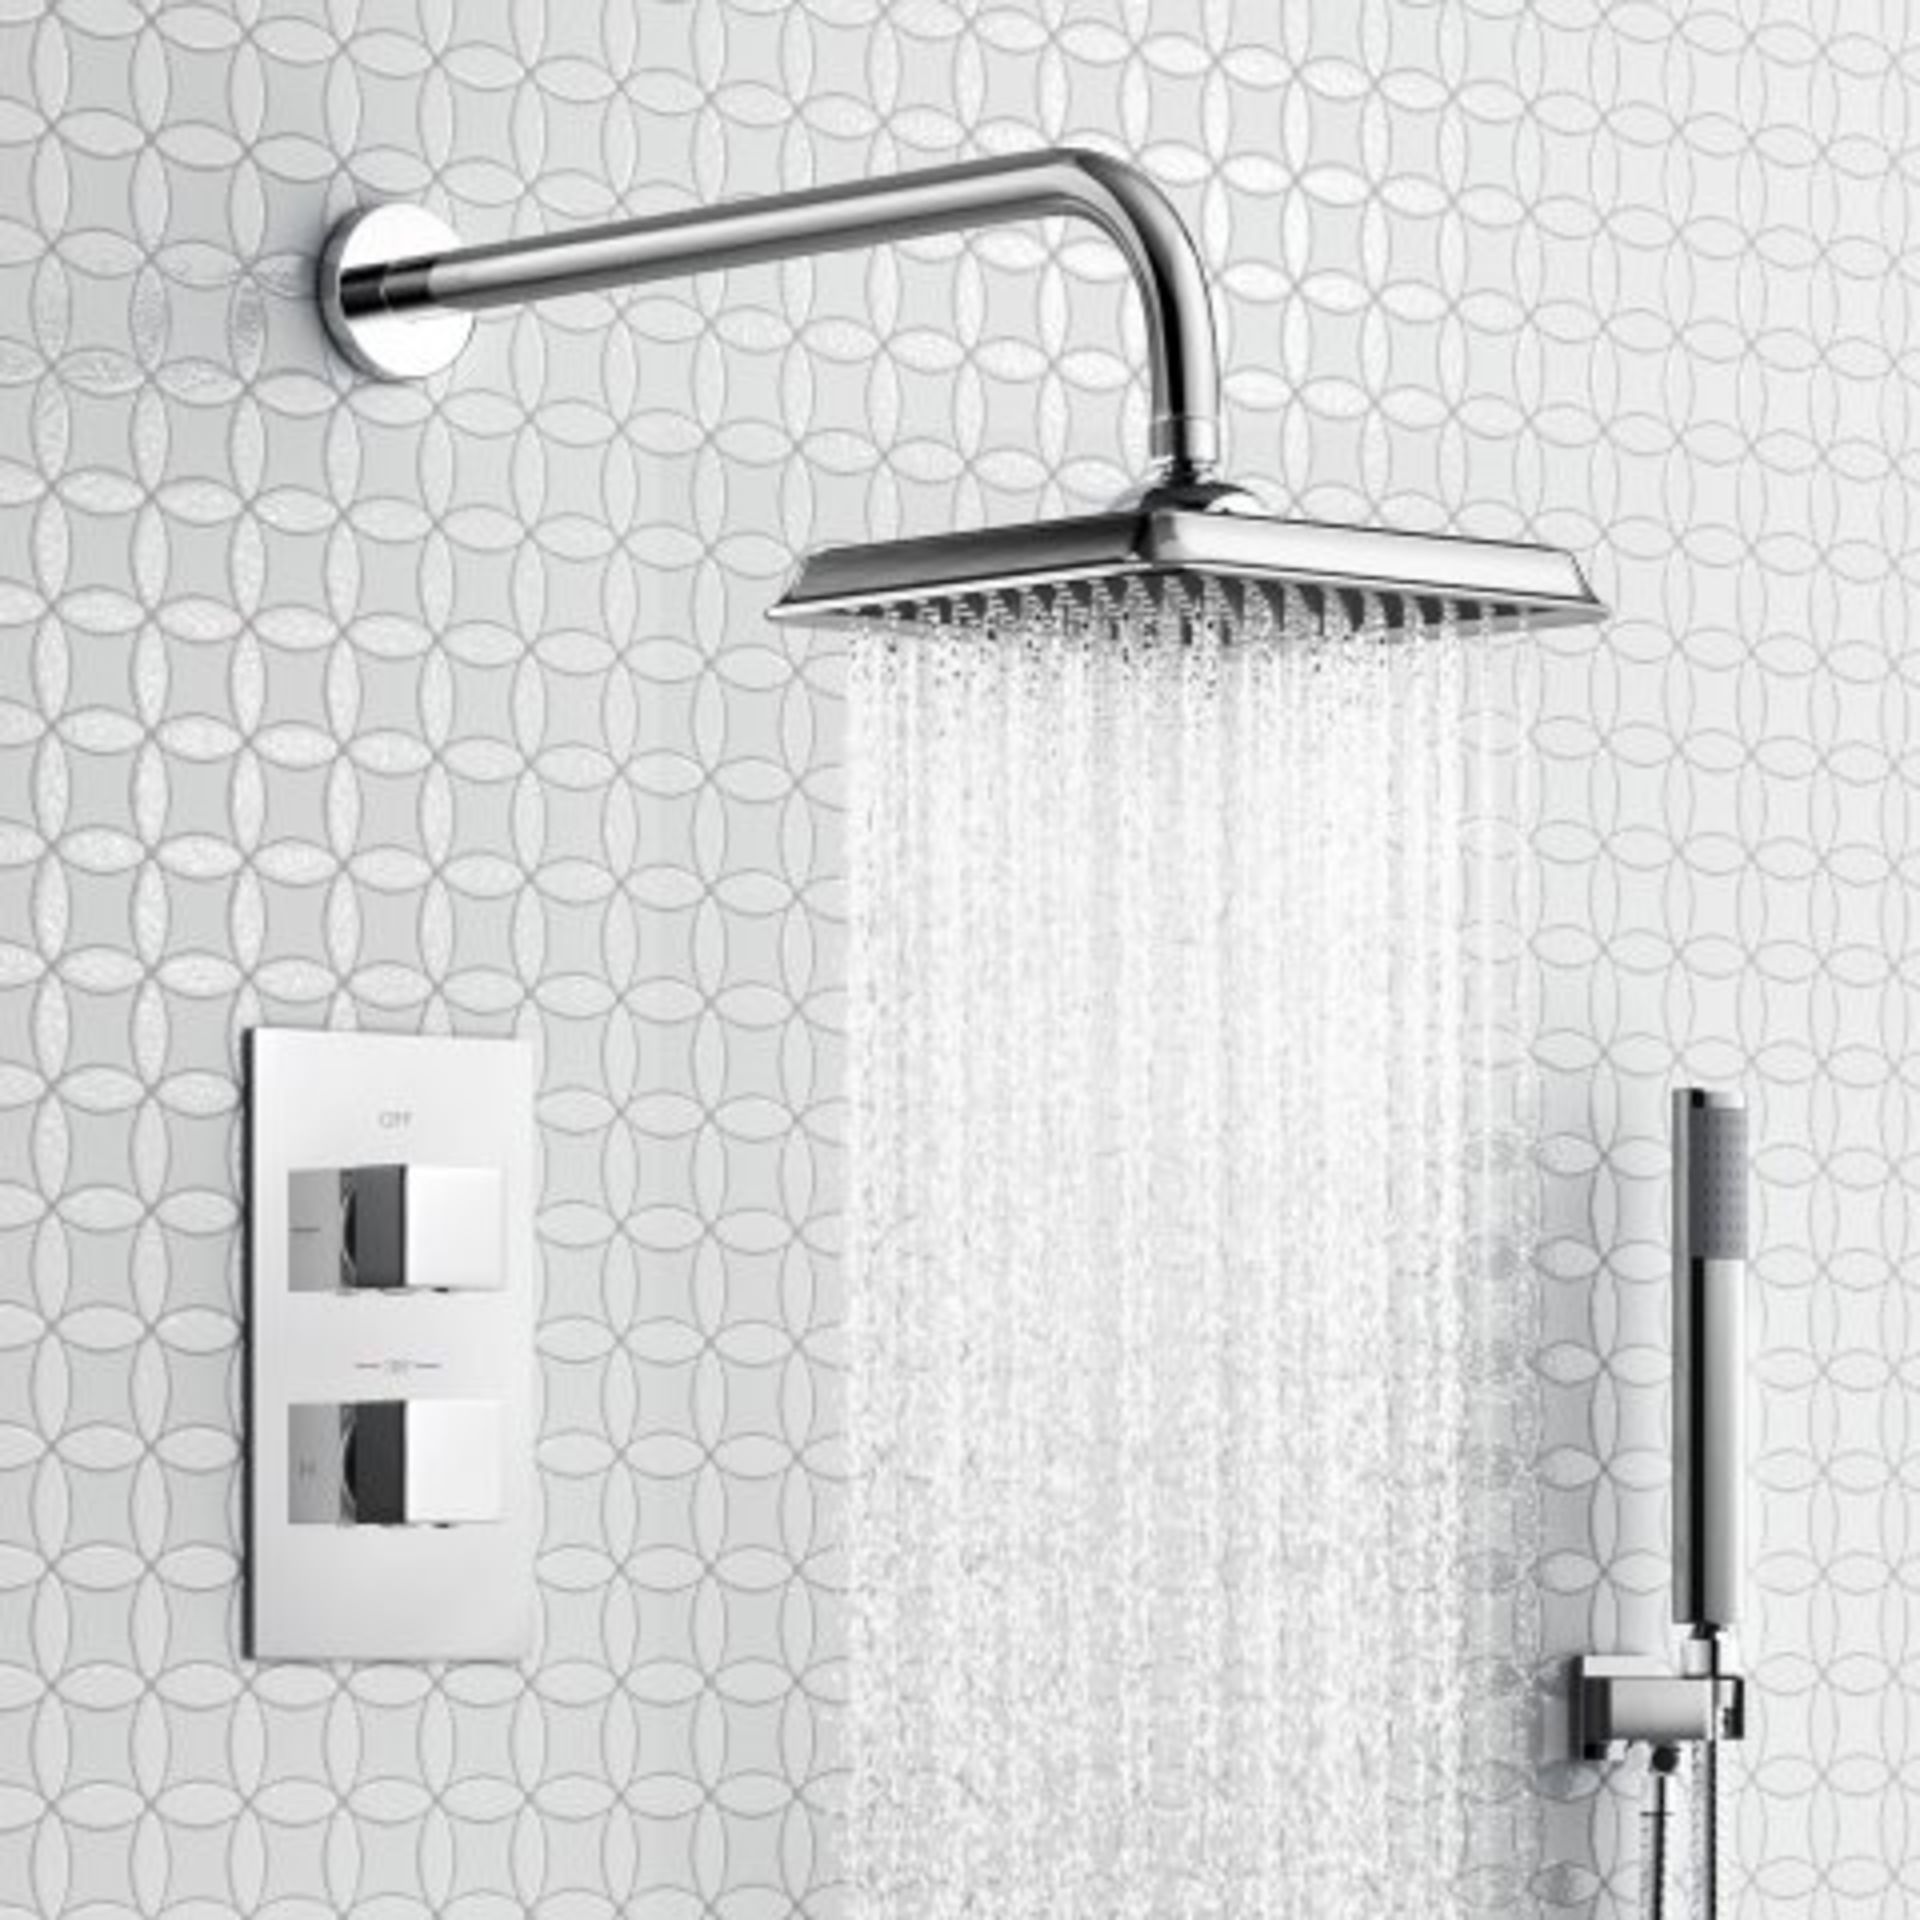 (H36) 200mm Square Wall Mounted Head, Handheld & Thermostatic Mixer Shower Kit. RRP £299.99.